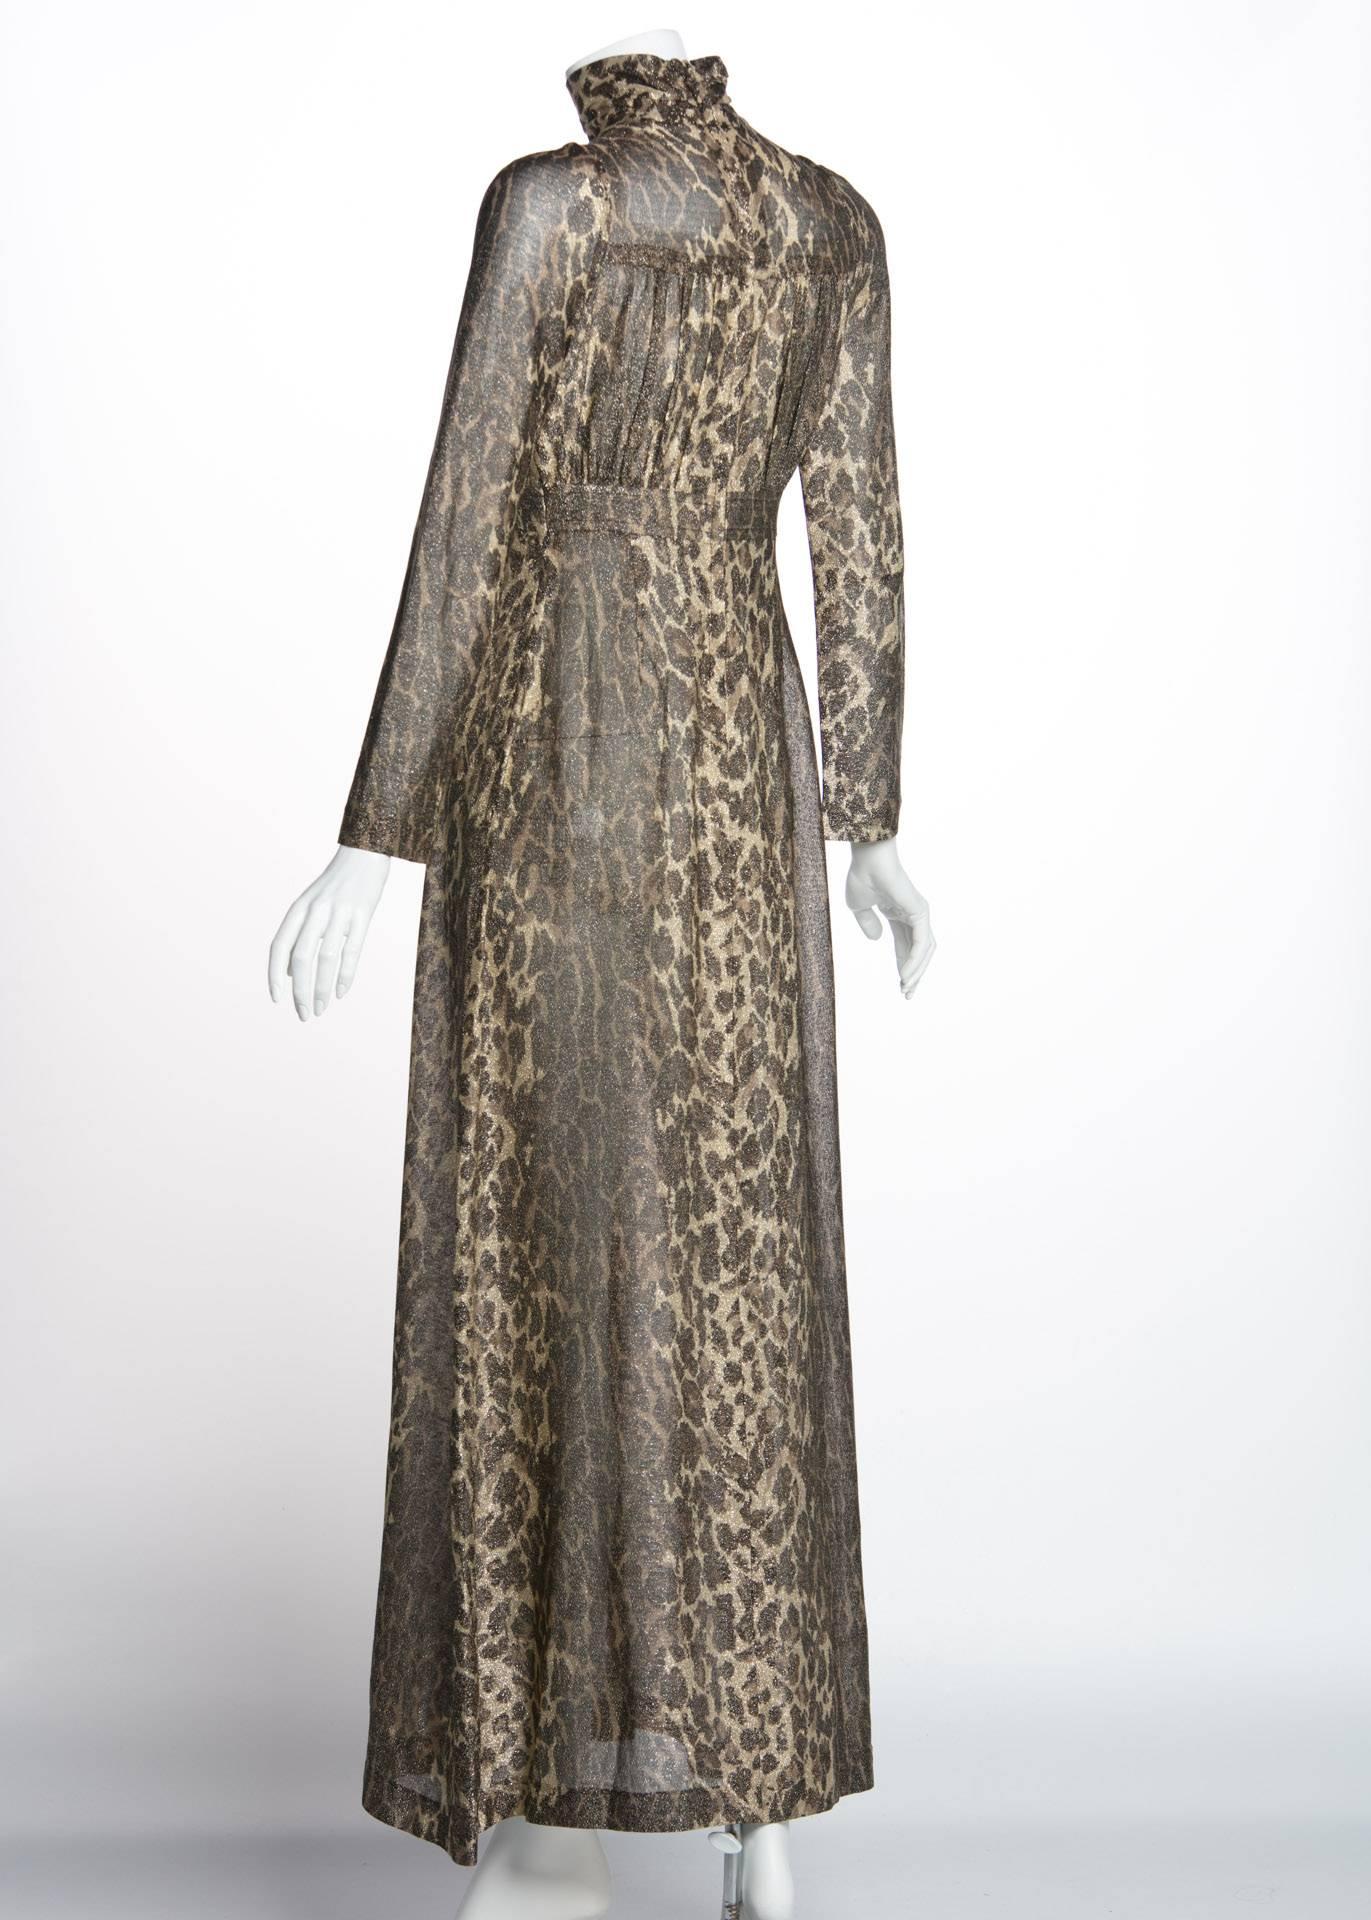 1970s Janice Wainwright Empire Waist Metallic Cheetah Print Maxi Dress In Excellent Condition For Sale In Boca Raton, FL